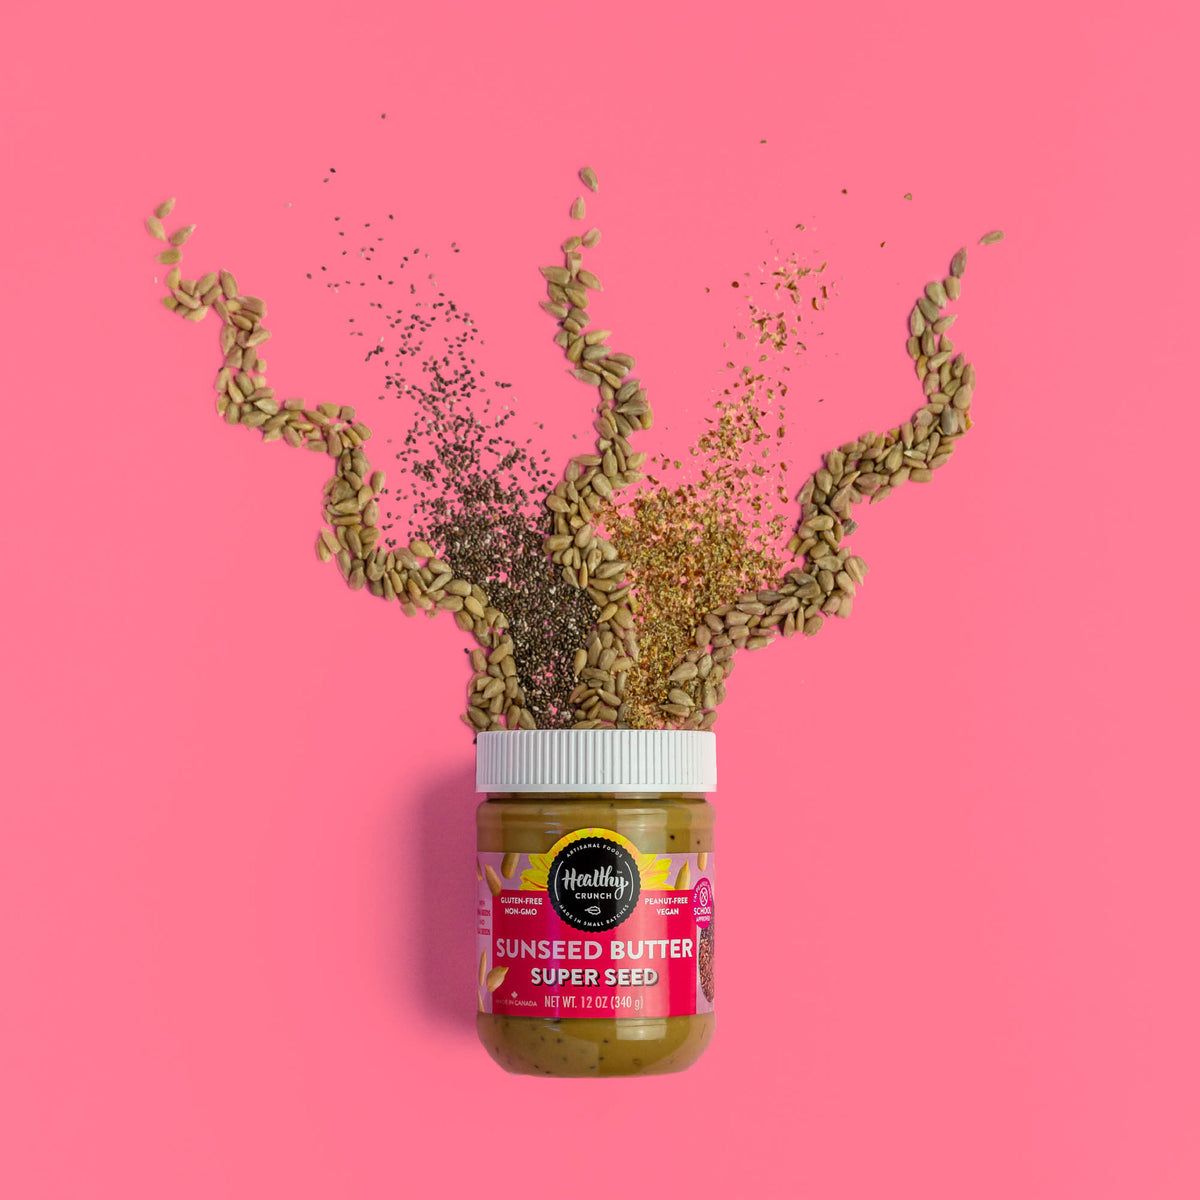 Superseed Seed Butter